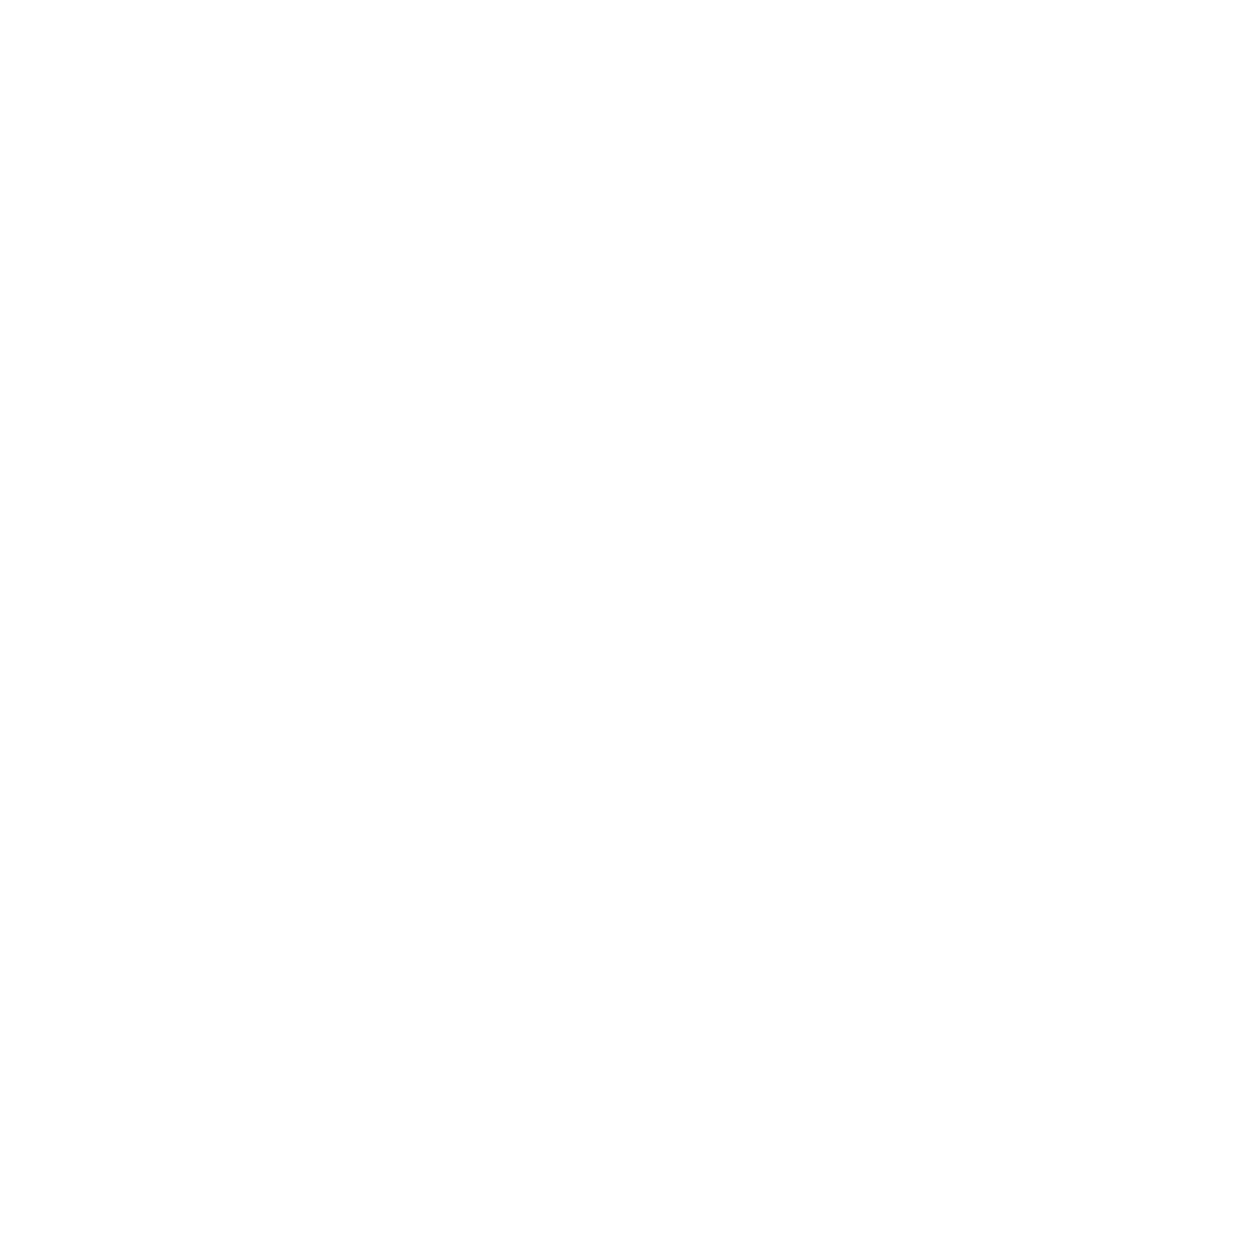 White nsa logo with stylized letters inside a burst of starburst lines on a dark green background.